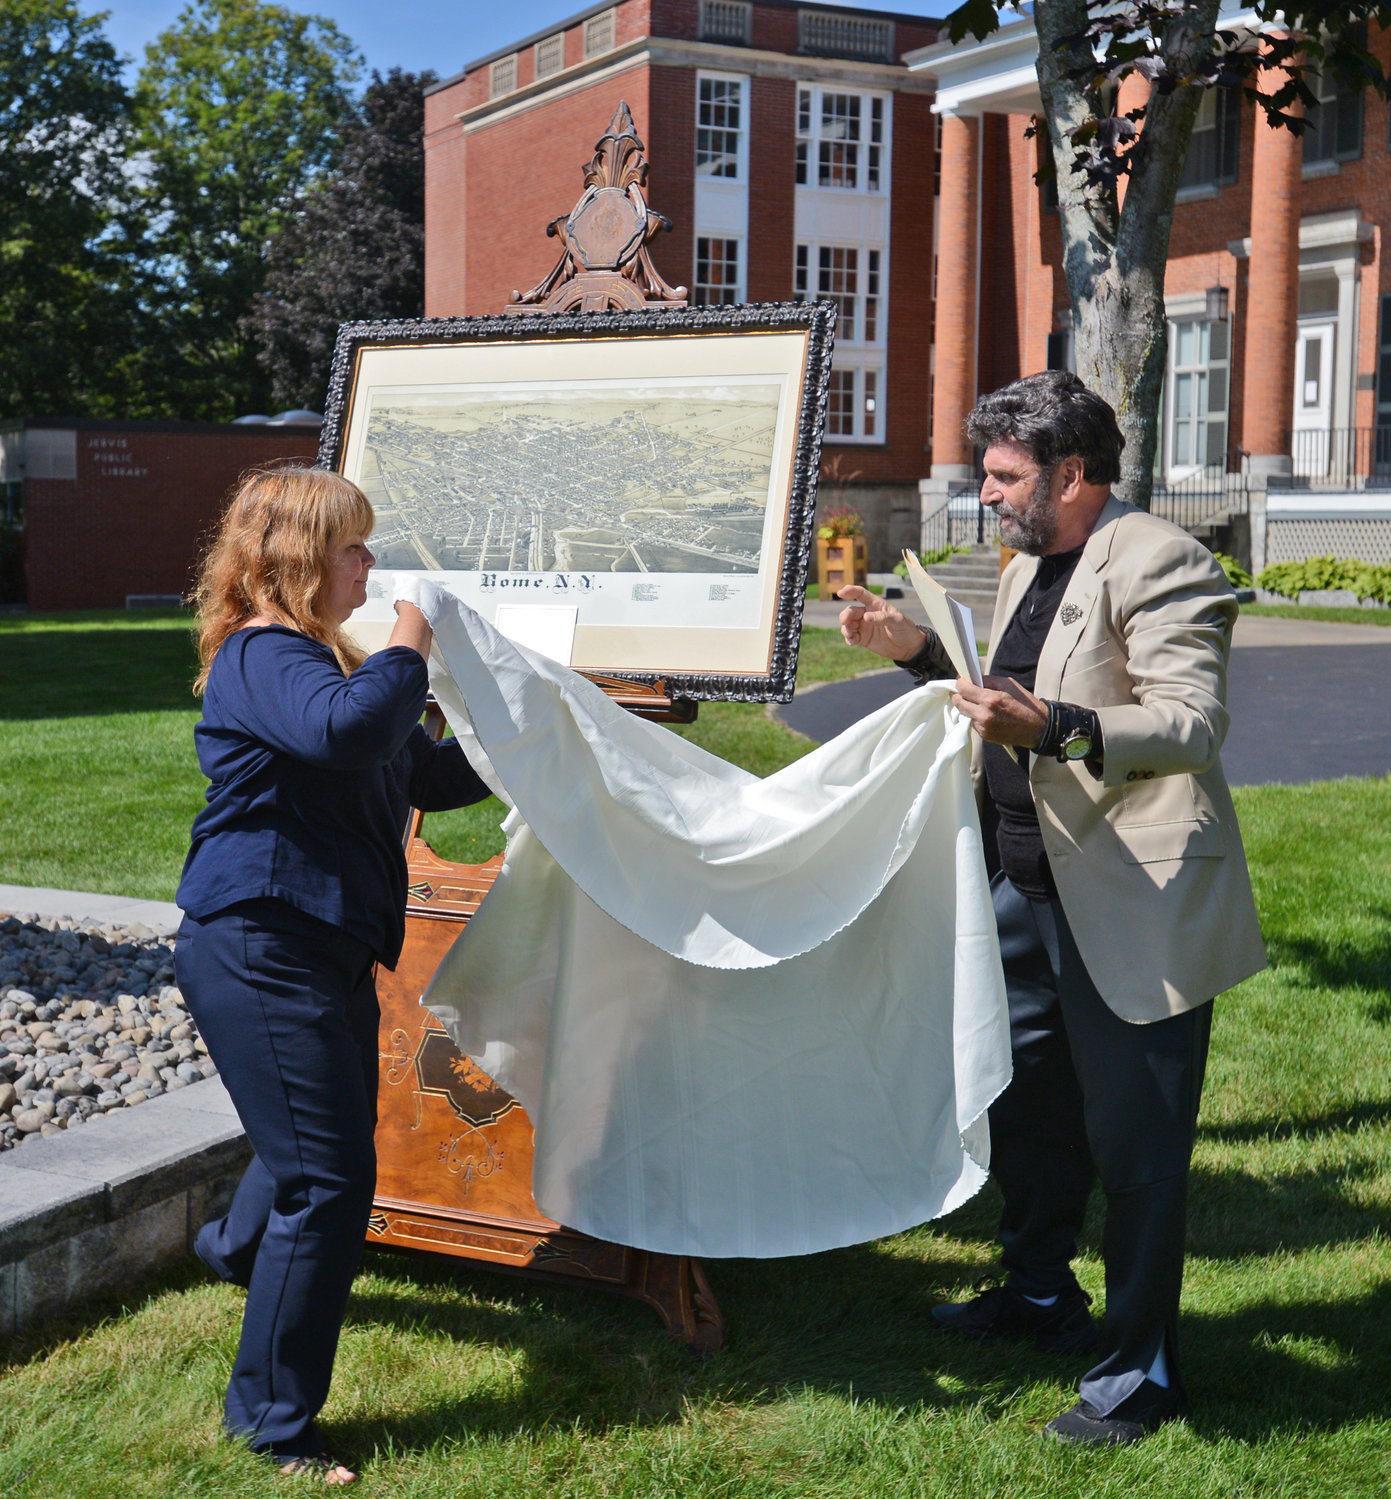 UNVEILING — Lori Chen and Steven Strange unveil the 1886 Lithograph map of Rome that was donated to Jervis Library and will be displayed in the Dillon Room.